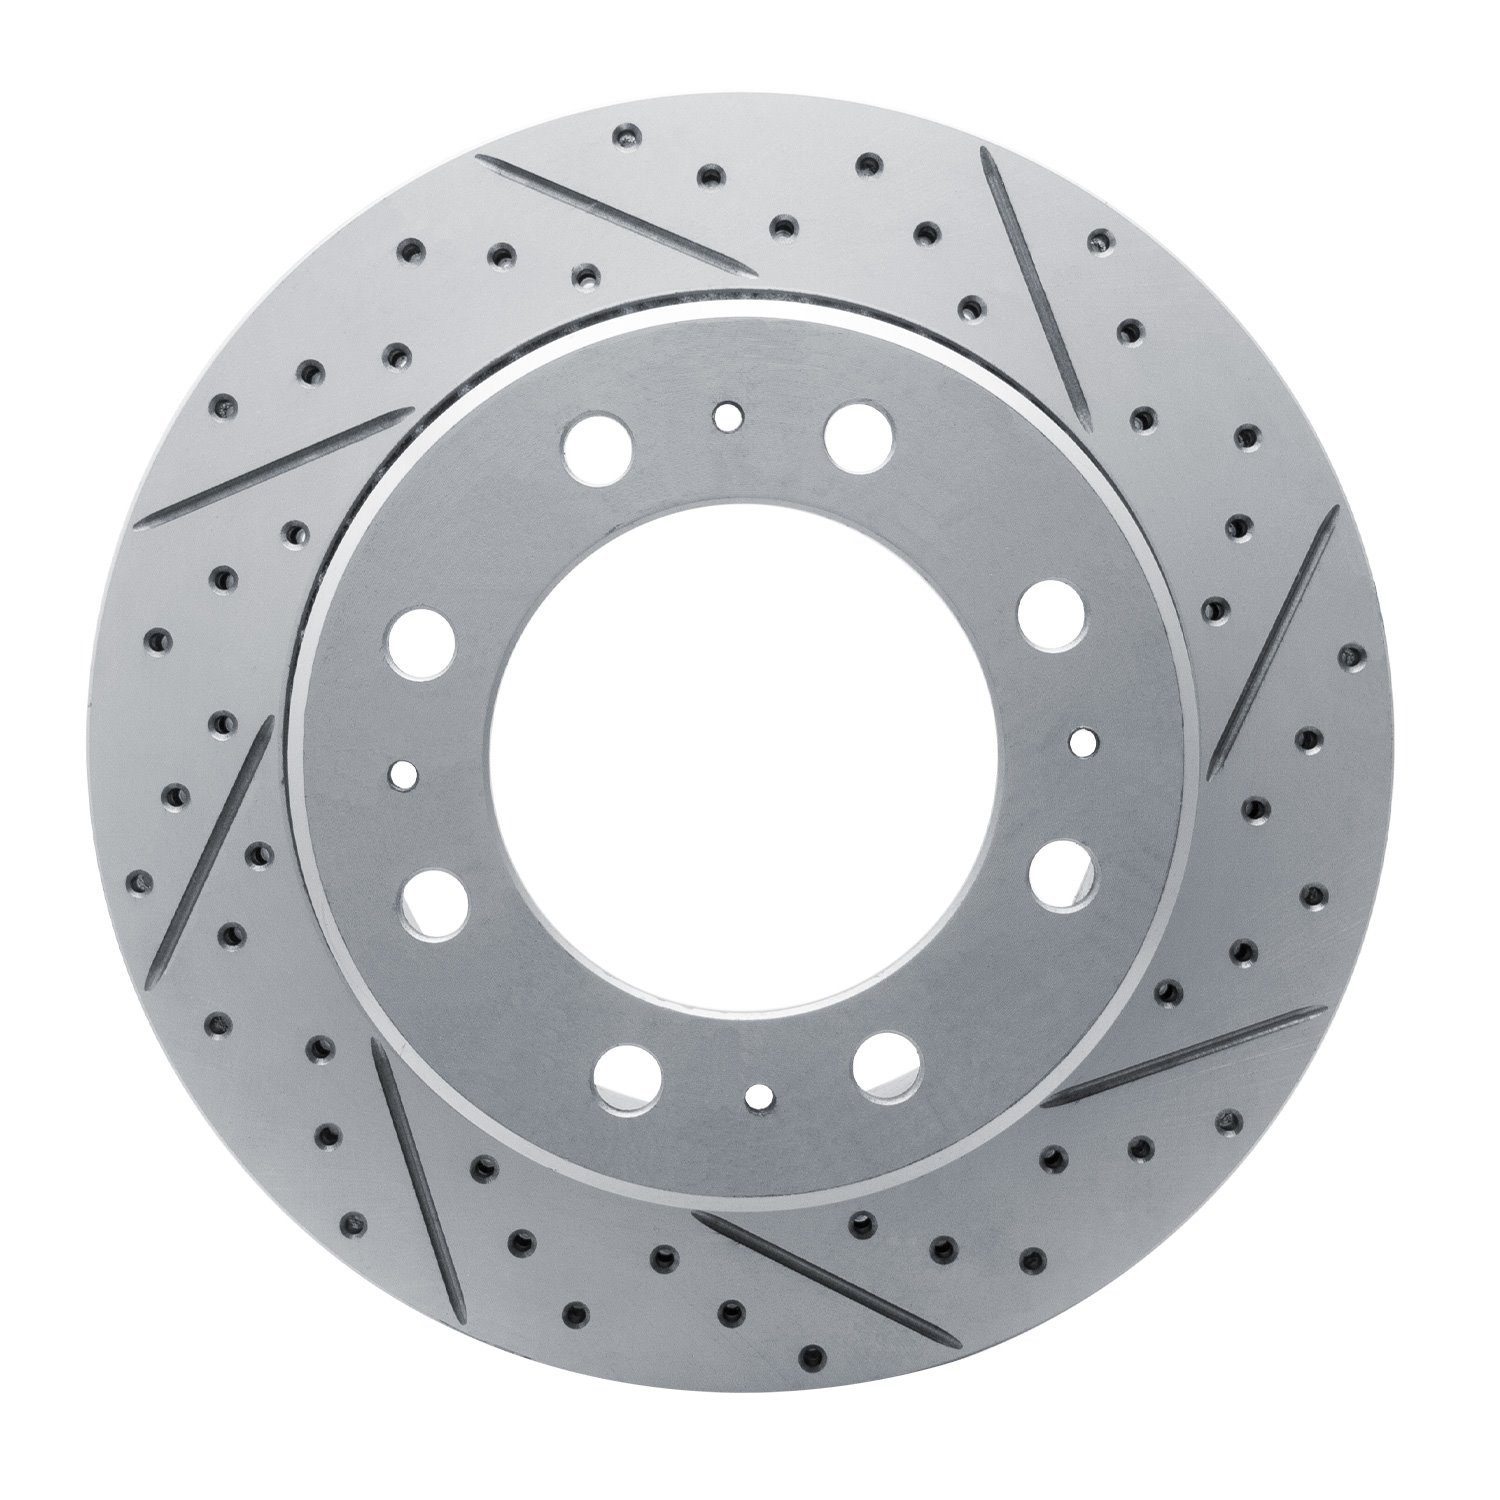 830-40118R Geoperformance Drilled/Slotted Brake Rotor, Fits Select Mopar, Position: Rear Right